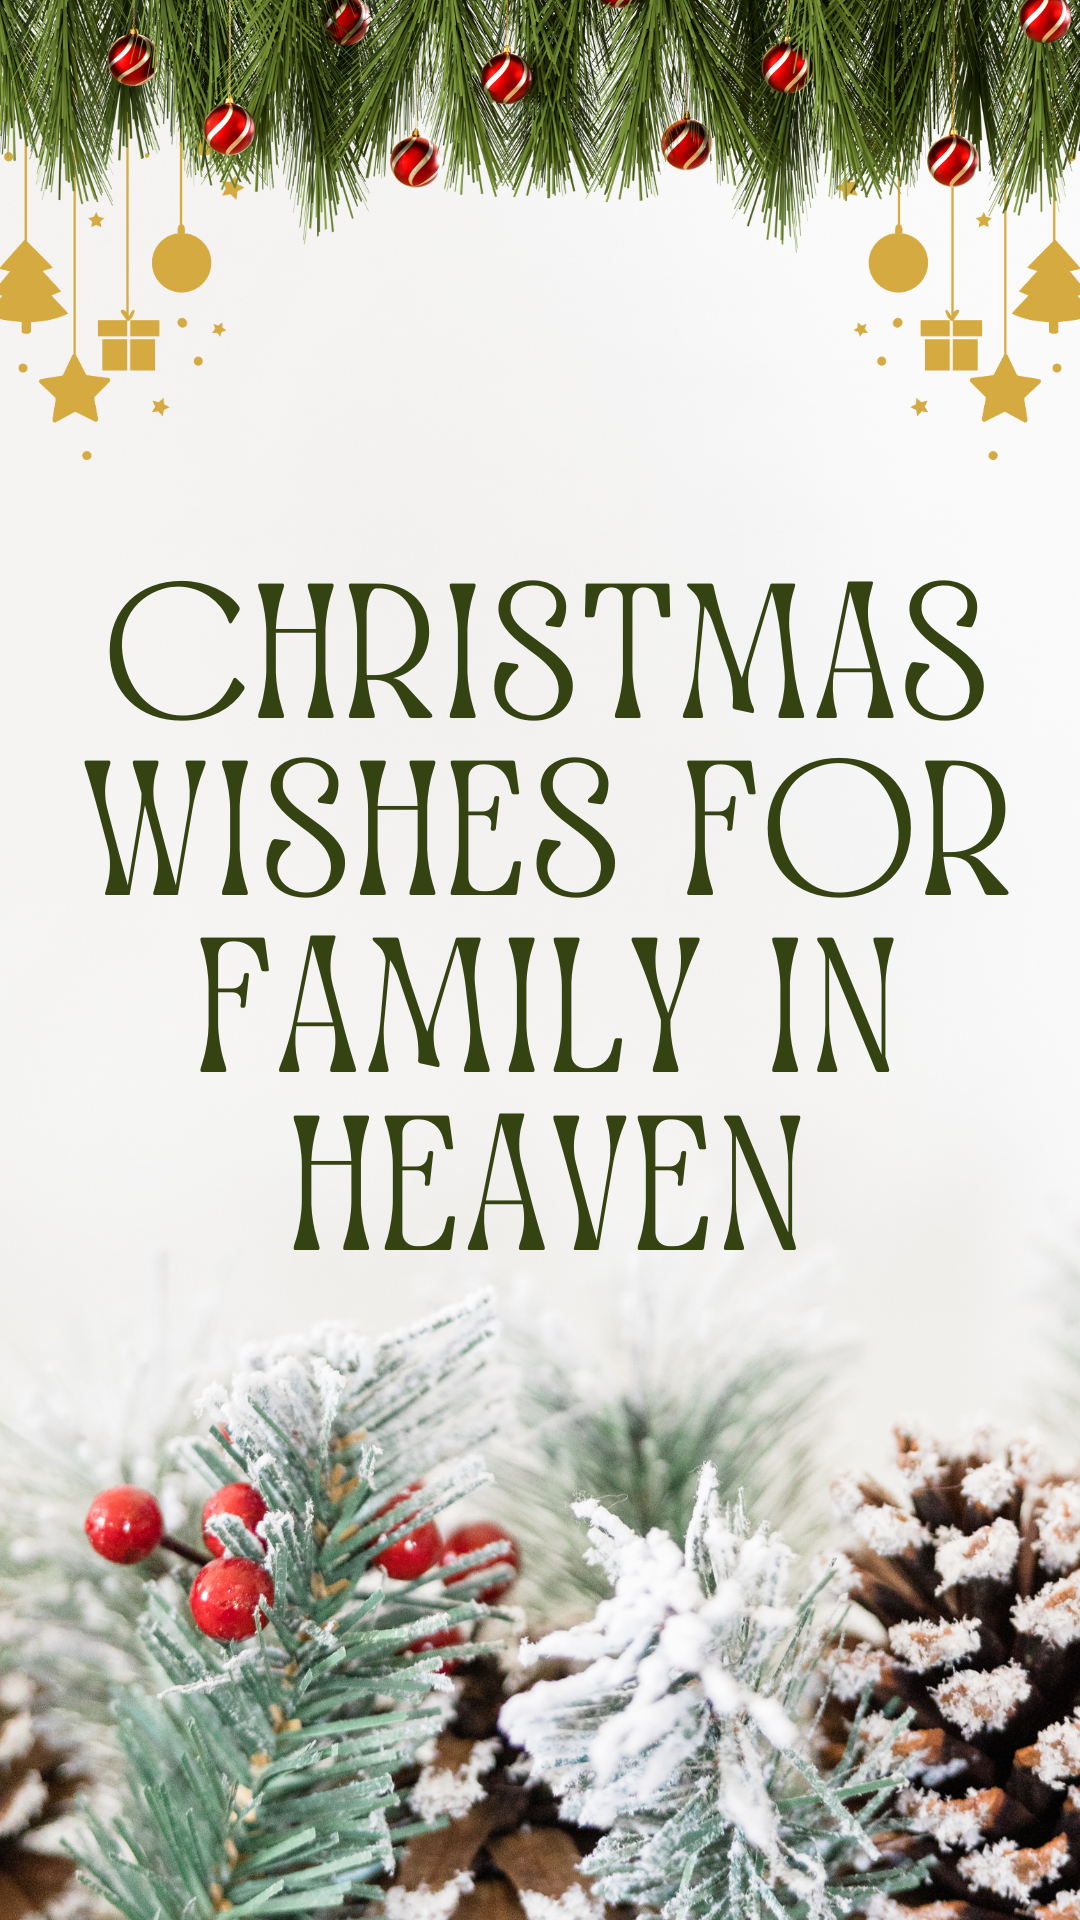 List of Christmas wishes for family in heaven